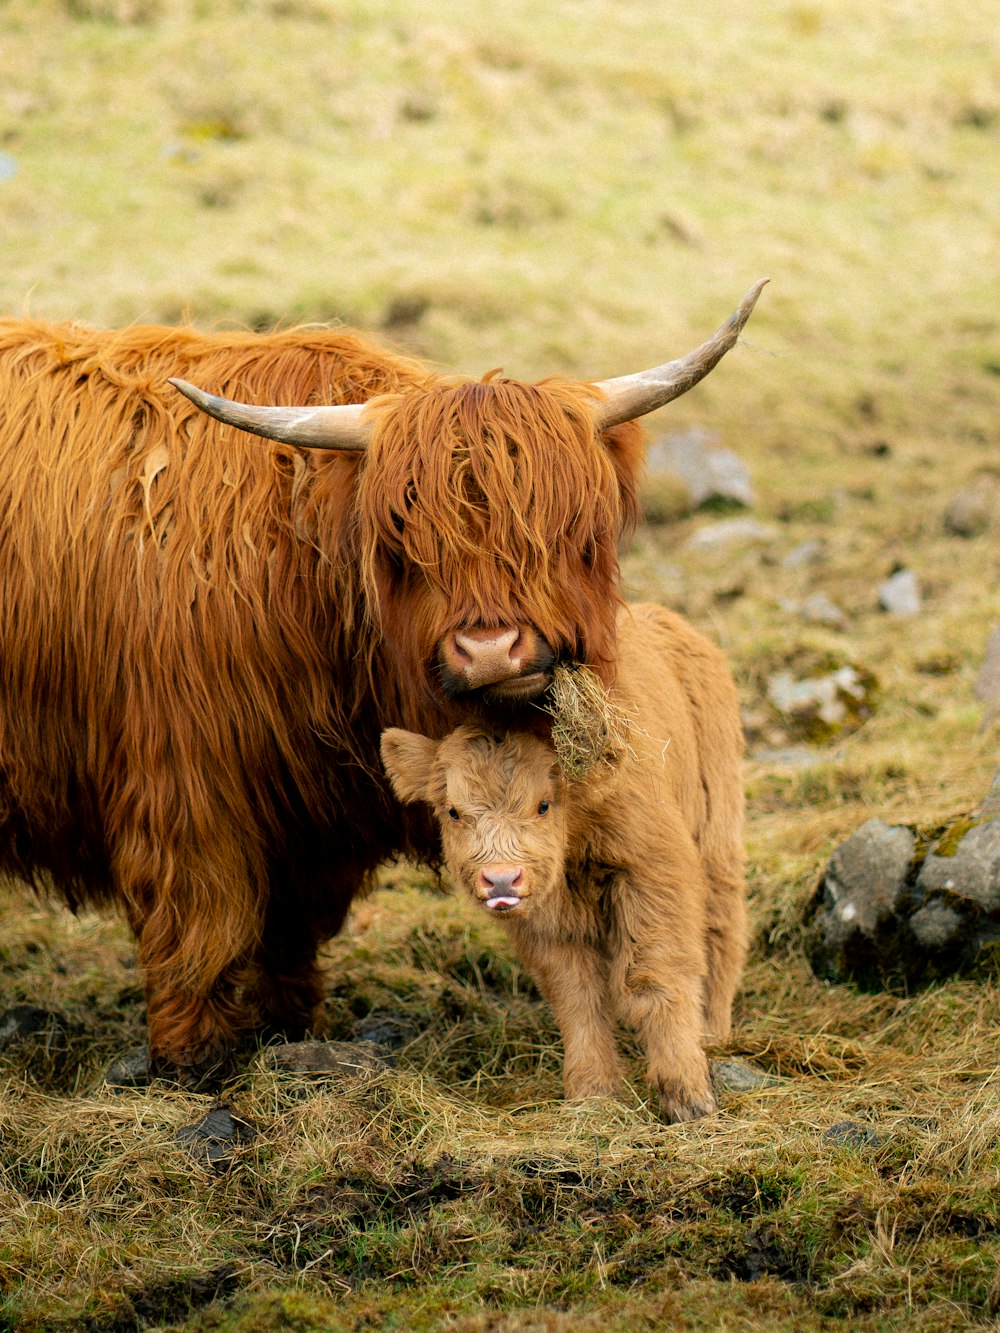 a baby yak is standing next to an adult yak